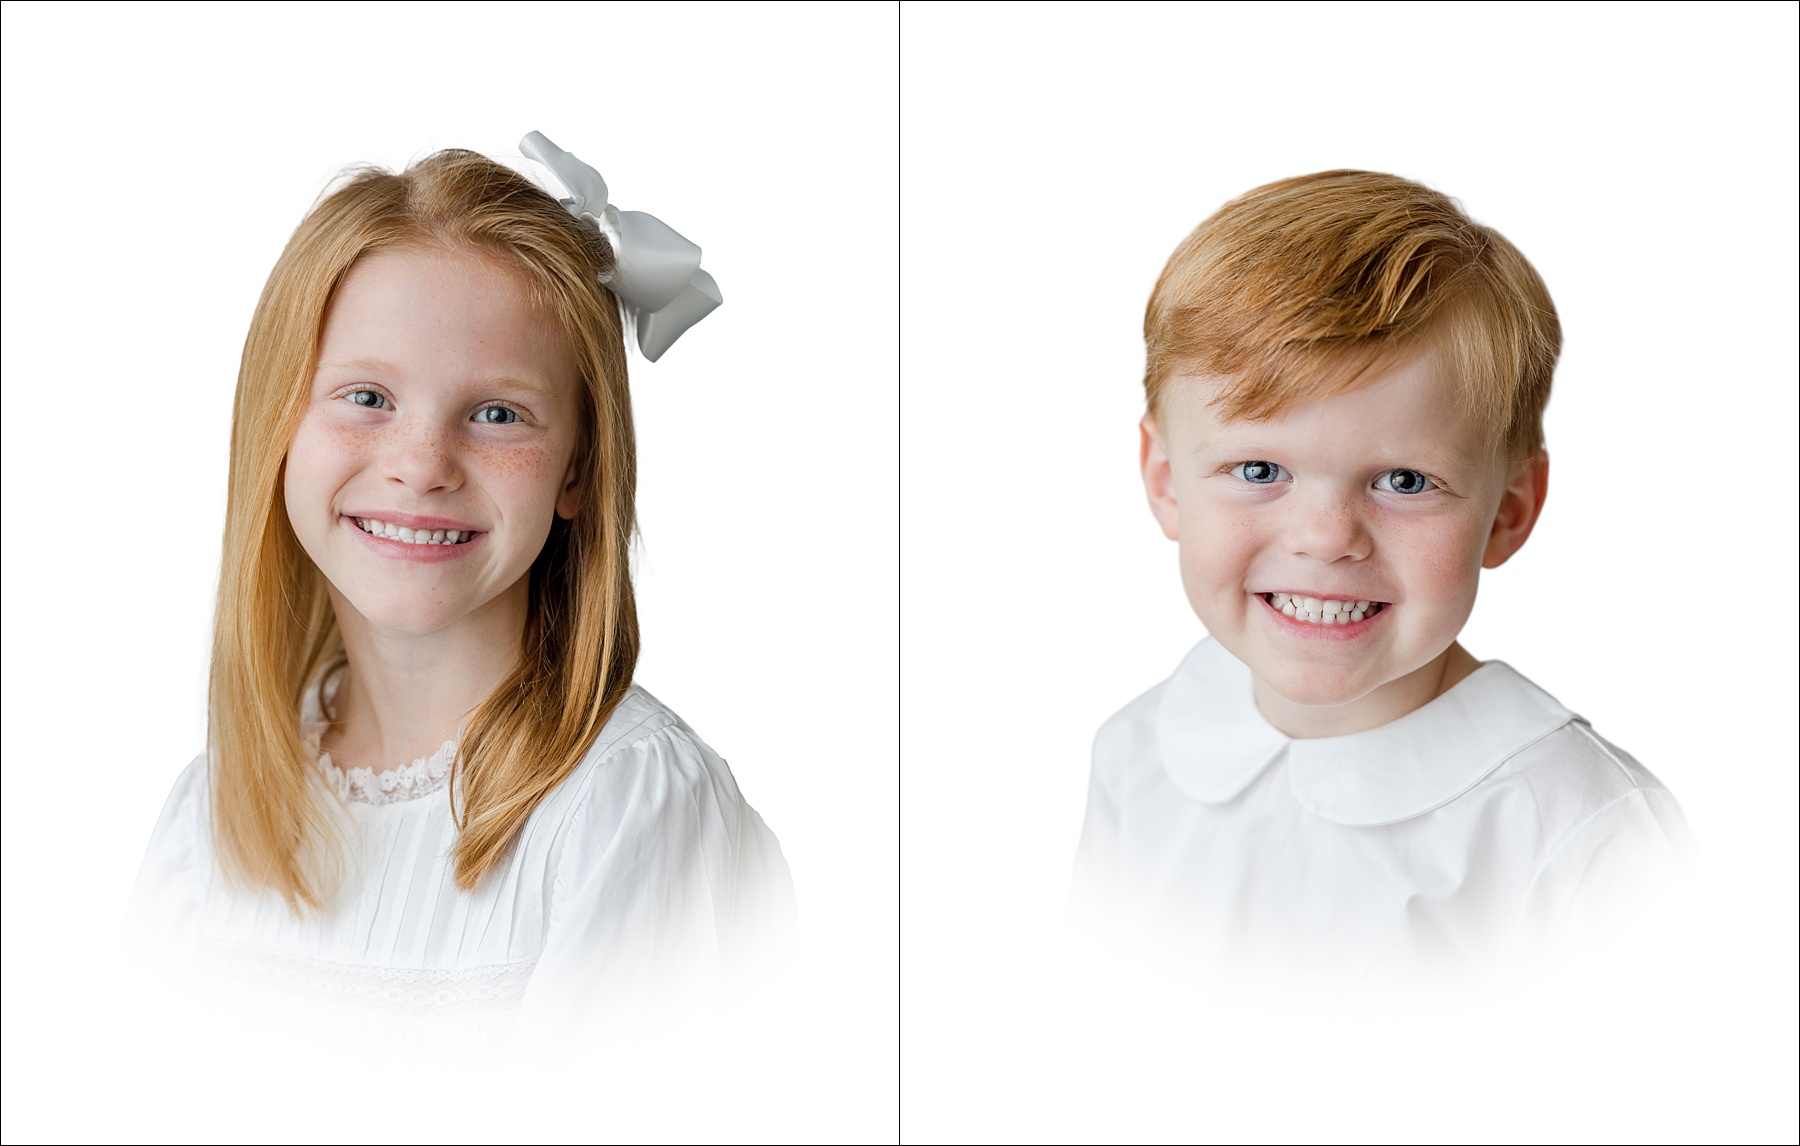 South Carolina heirloom portraits with a white vignette of a red headed young girl and her red headed brother.